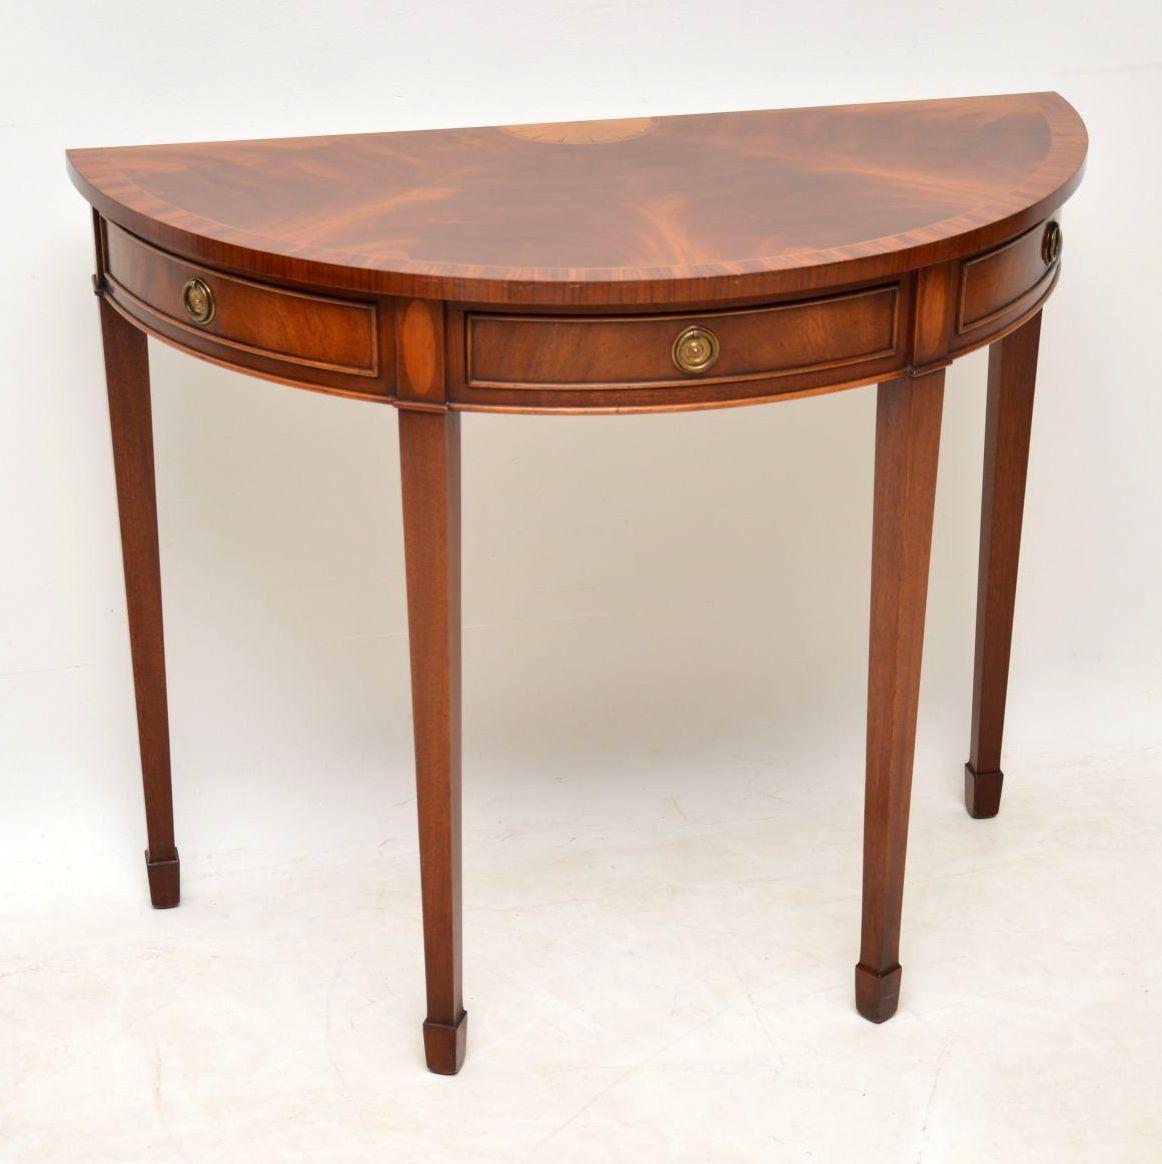 Elegant antique inlaid mahogany console table in excellent condition and having just been French polished. The top is made up of segmented flame mahogany veneers, with a satinwood inlaid design and cross banding in rosewood or Kingwood which extends